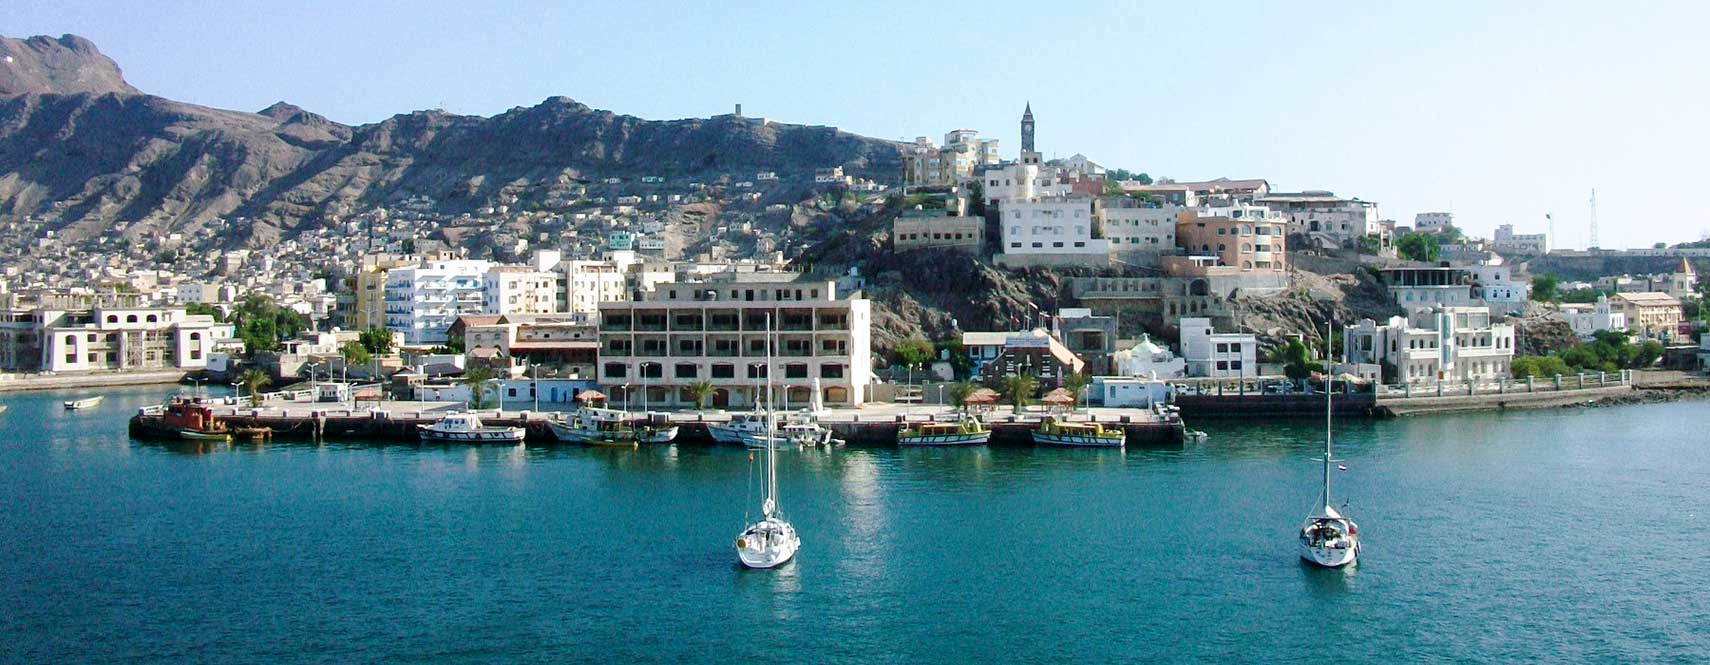 View of Aden from the Sea